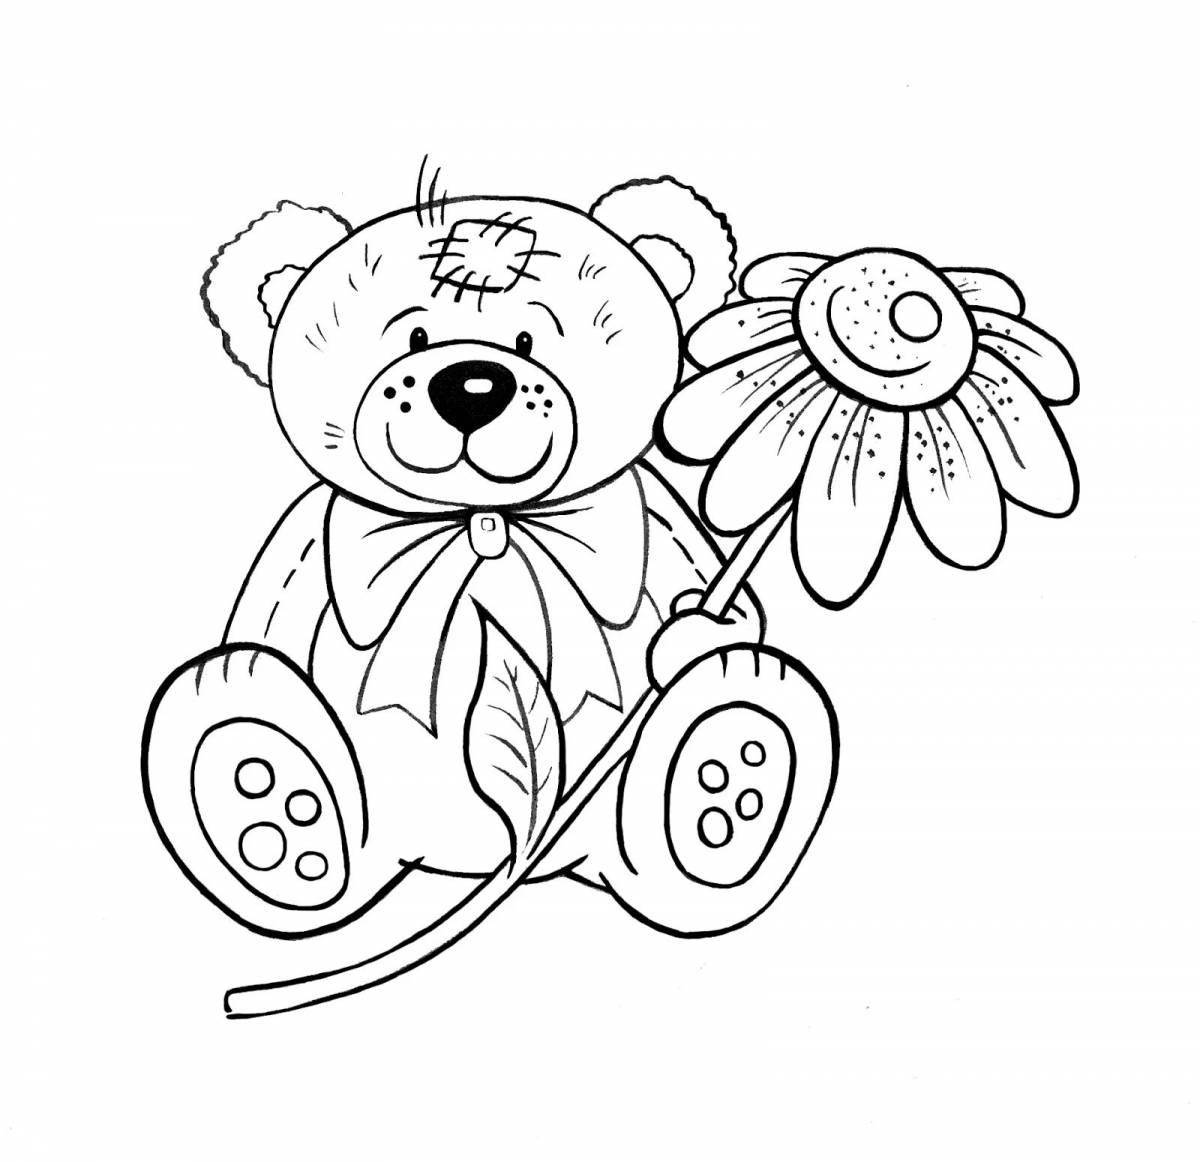 Adorable teddy bear in baby pants coloring book